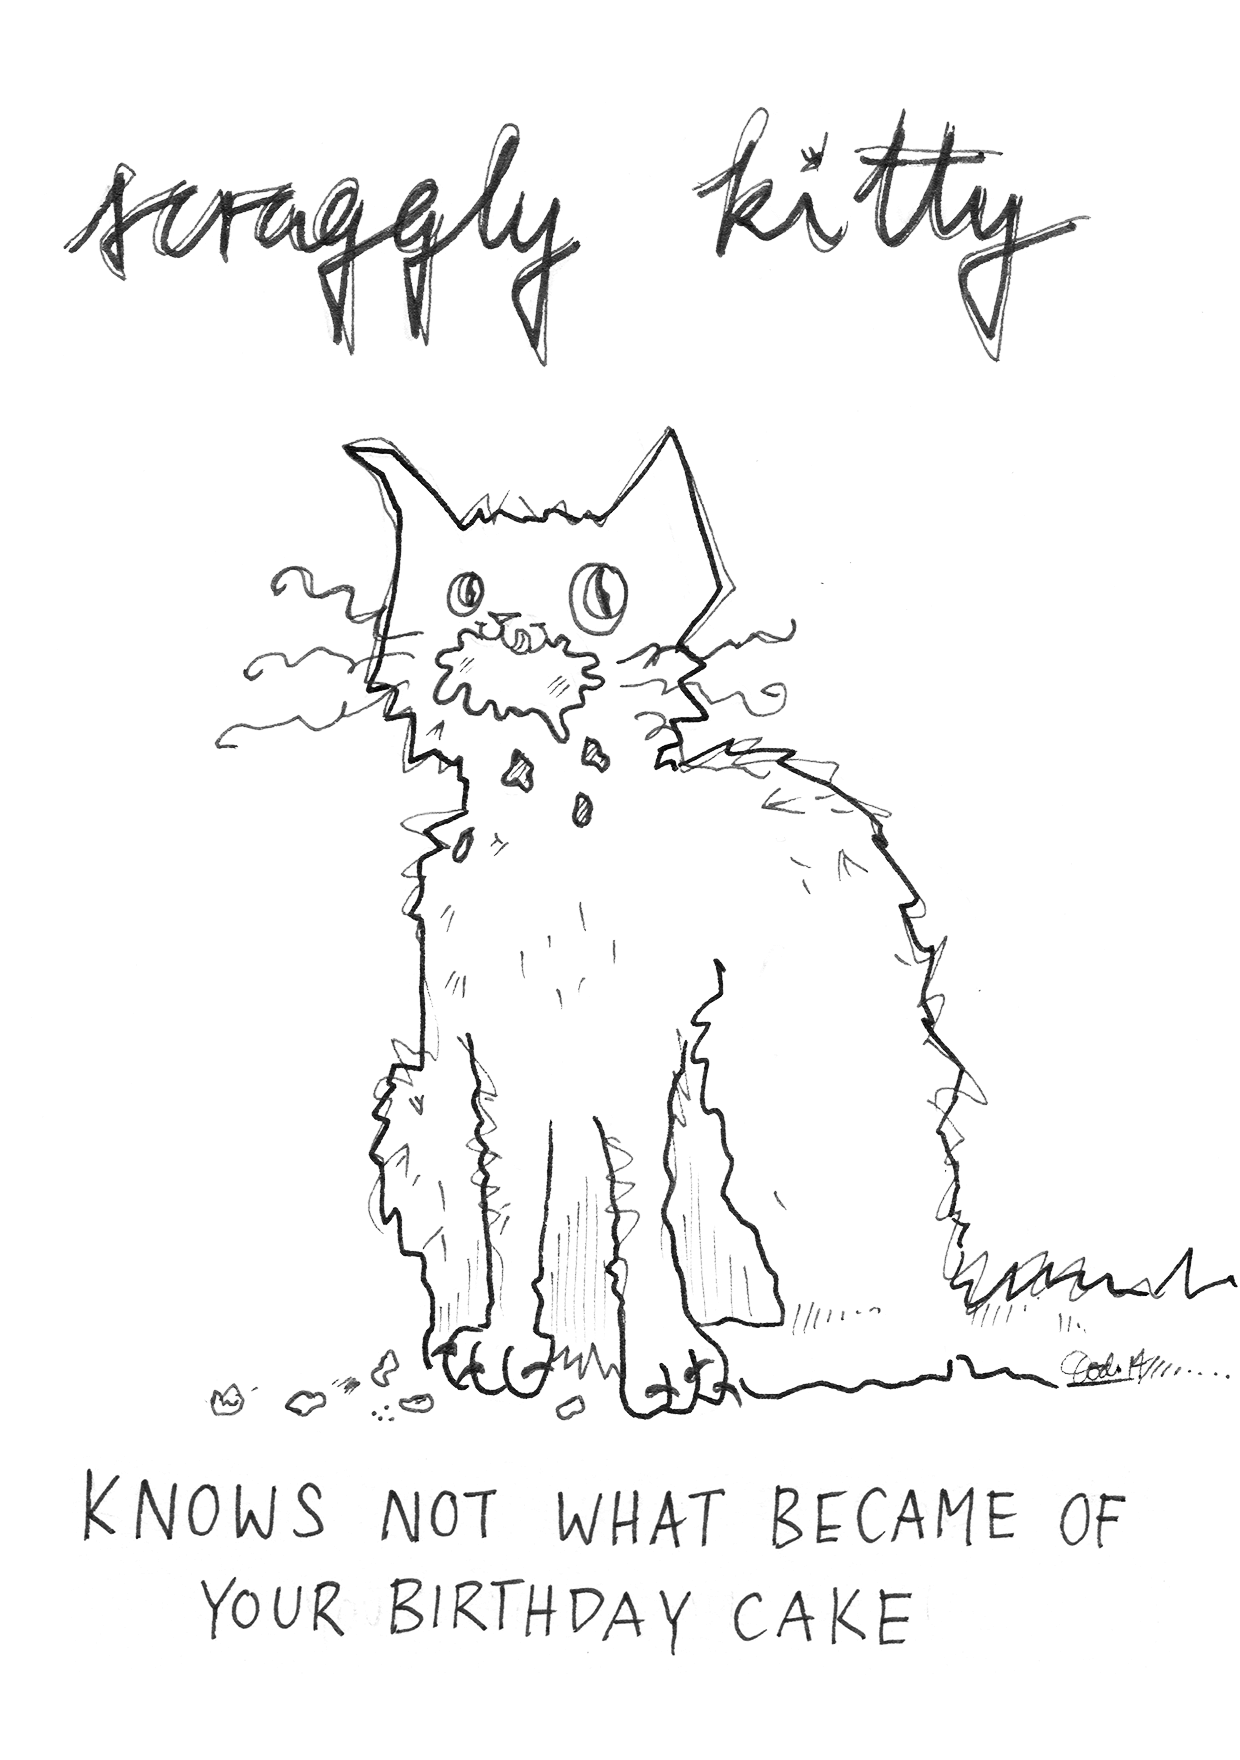 Scraggly Kitty Knows Not What Became Of Your Birthday Cake Greeting Card Scraggly Kitty Greeting Cards Card